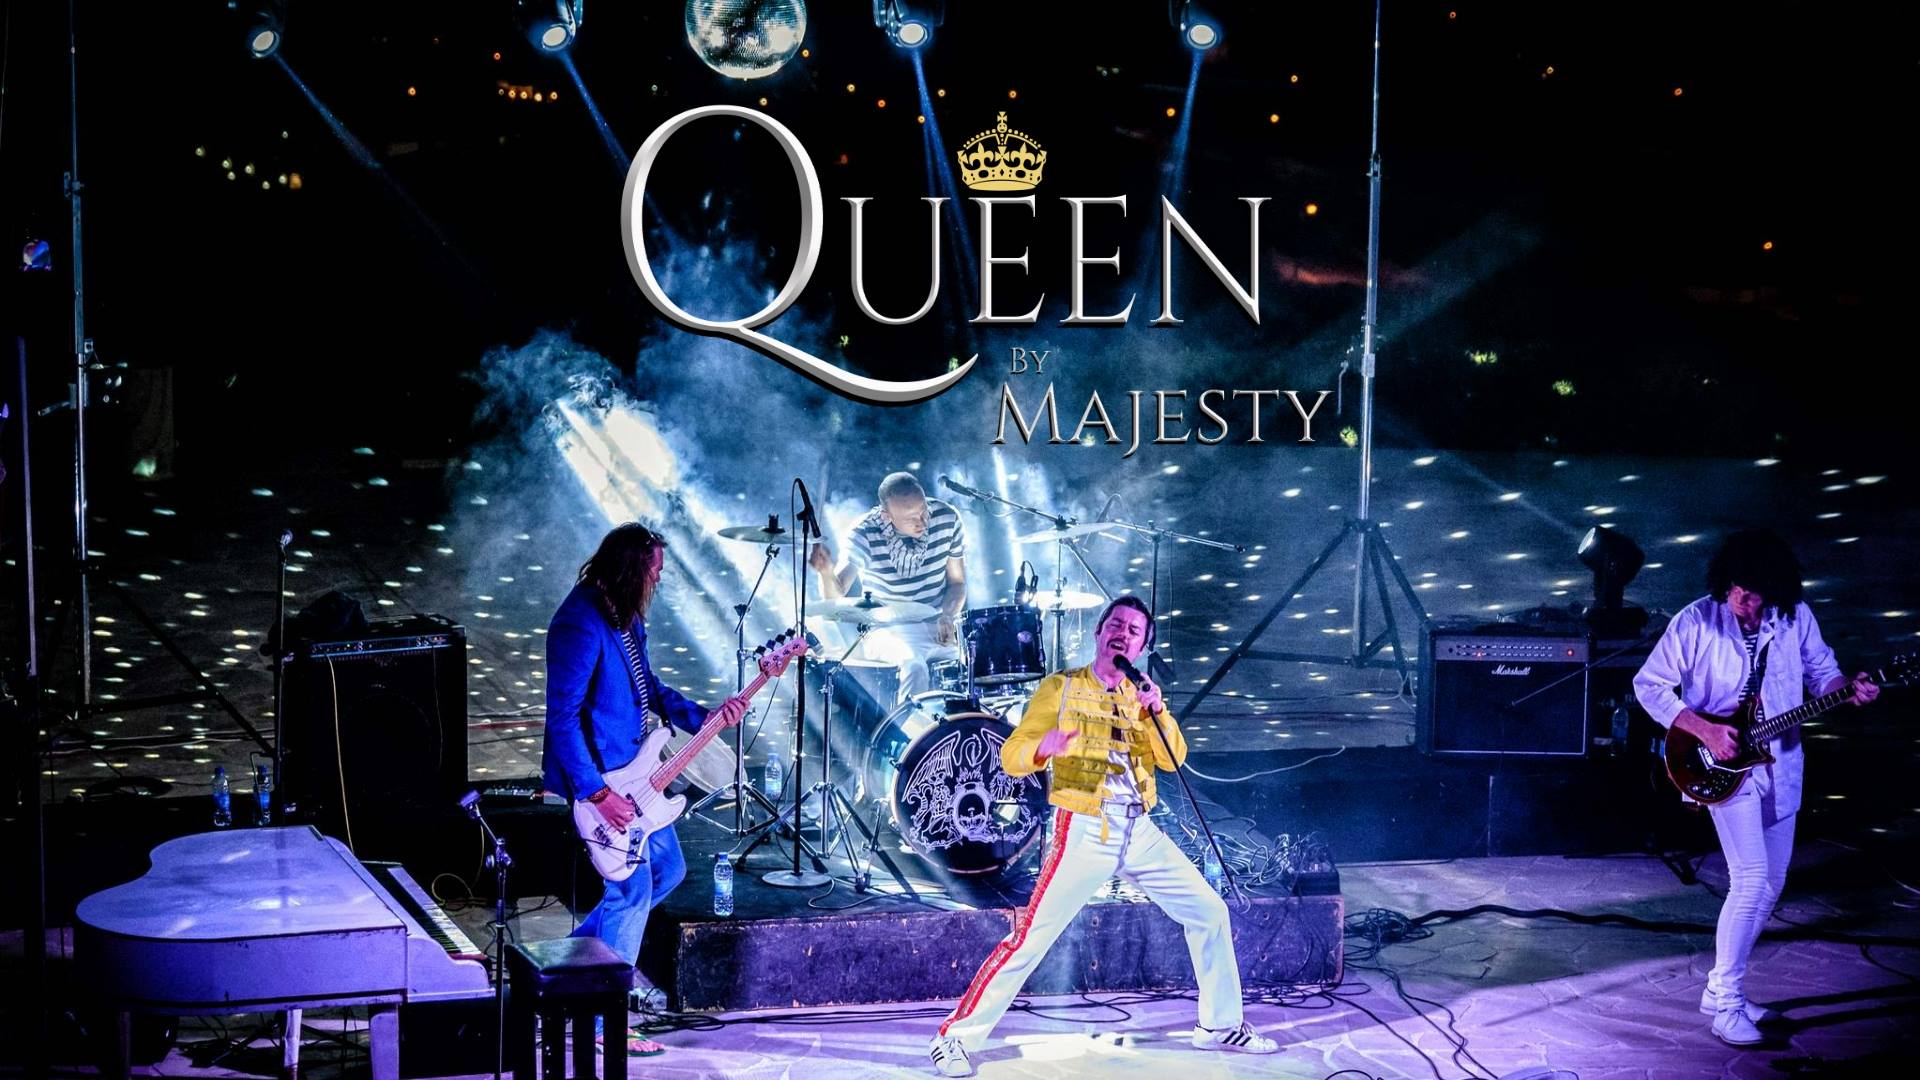 Queen By Majesty Theatre show - Coming Soon in UAE